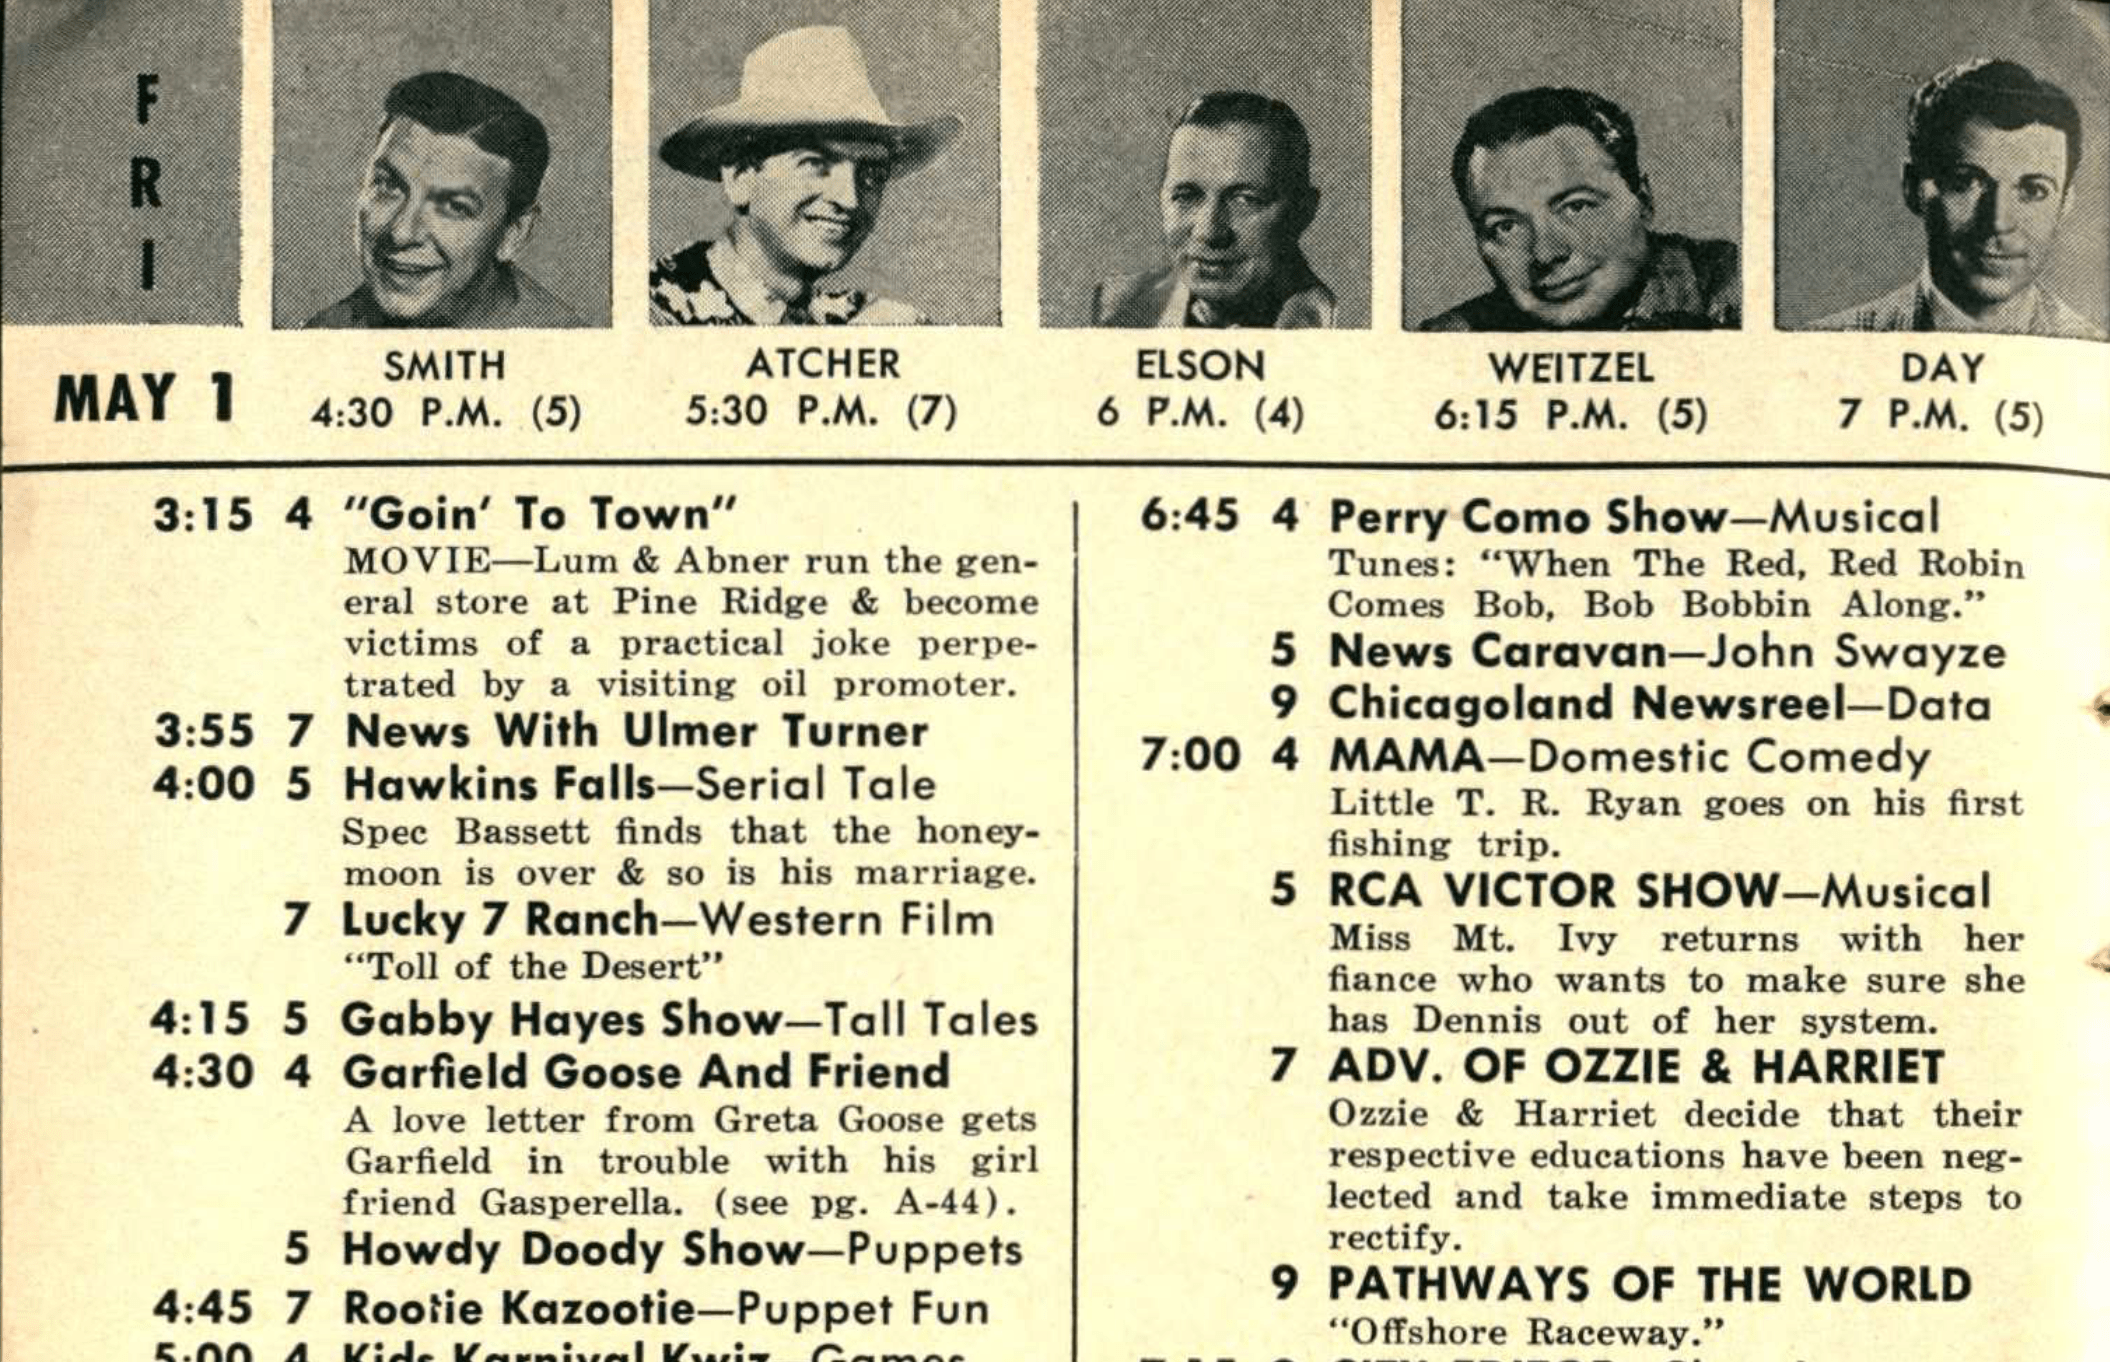 Detail of page A-14 from the 1-7 May, 1953 TV Guide issue.